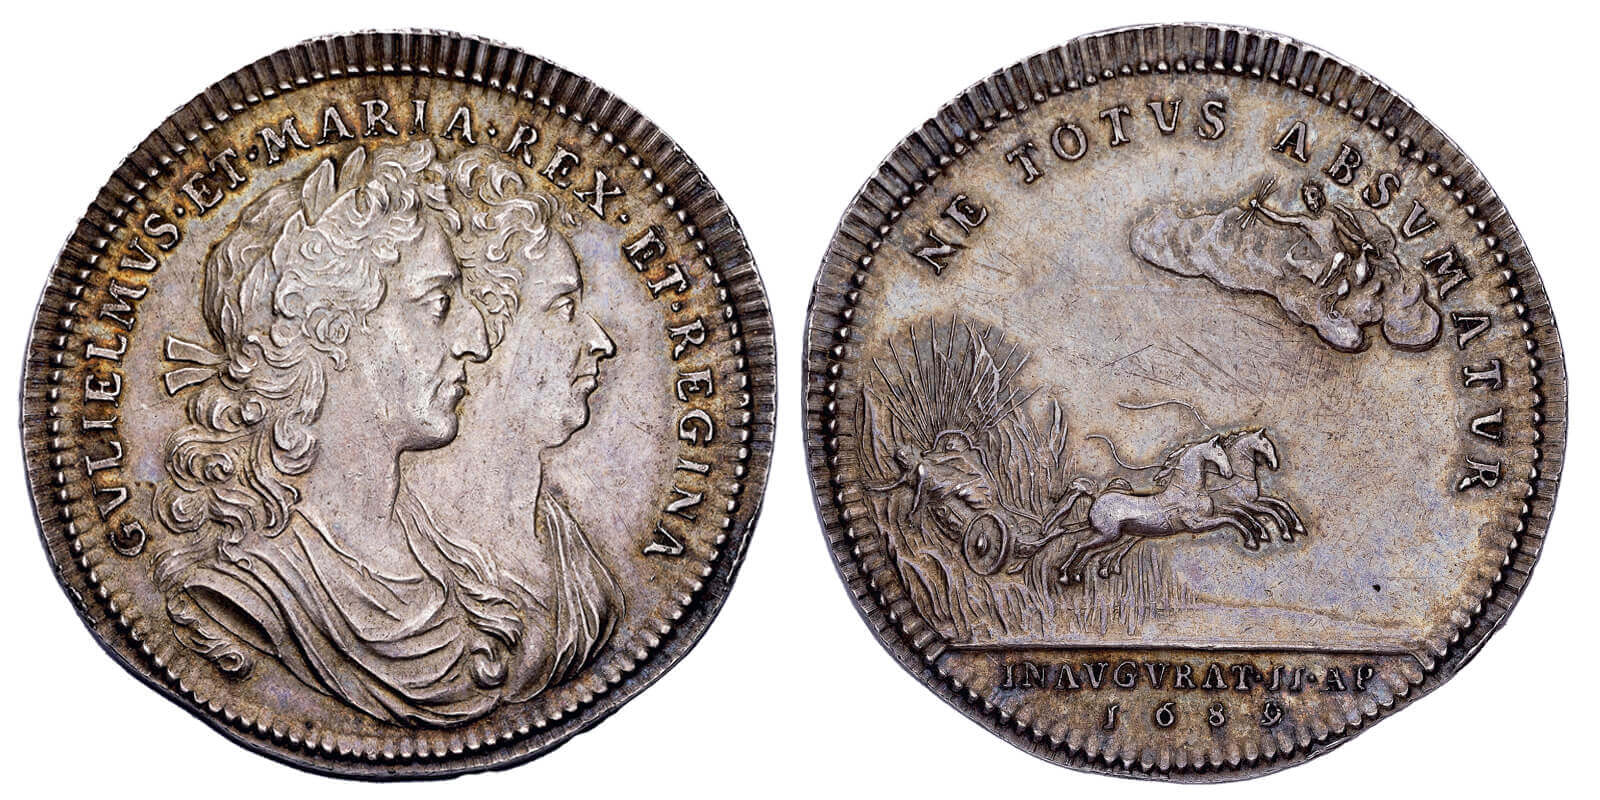 William and Mary coronation medal copy.jpg